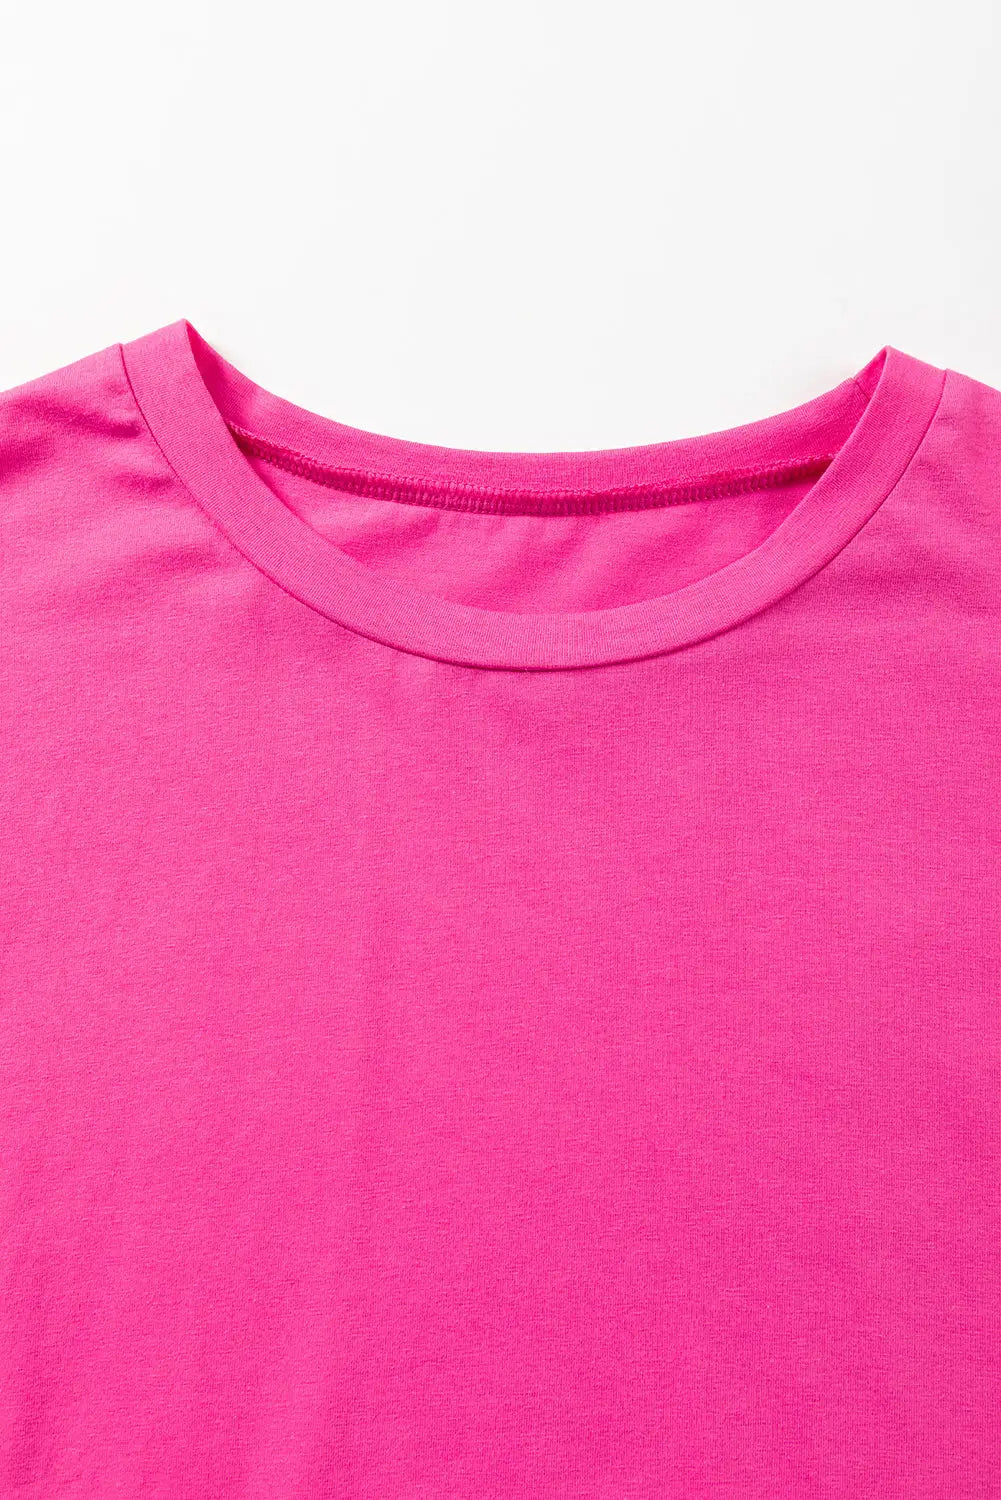 Bright pink sunshine on my mind graphic tee - tops